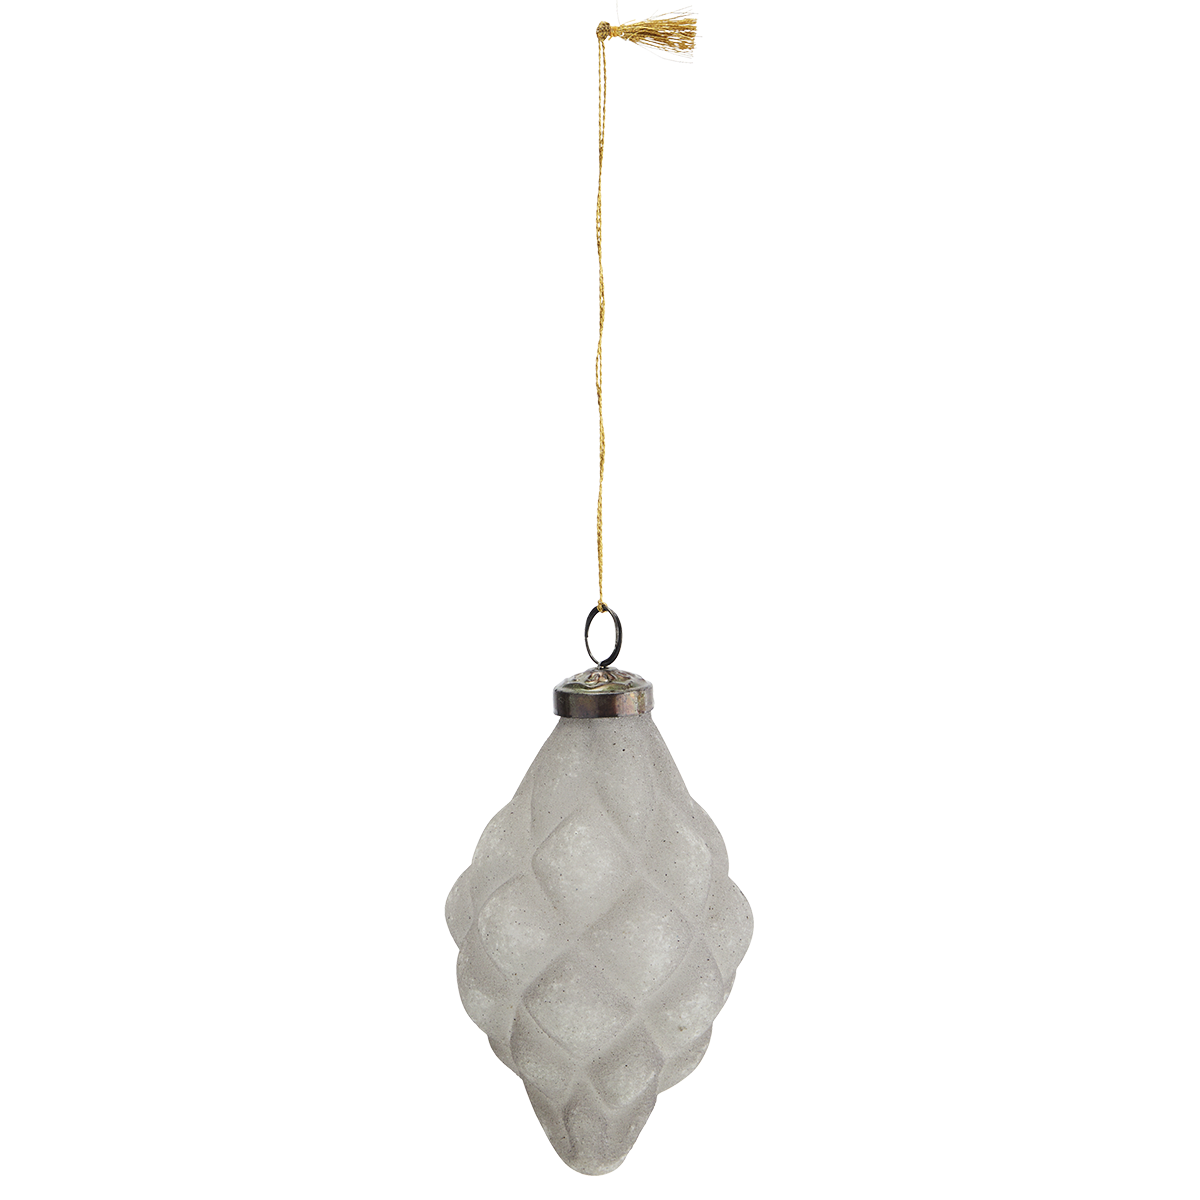 Hanging glass cone